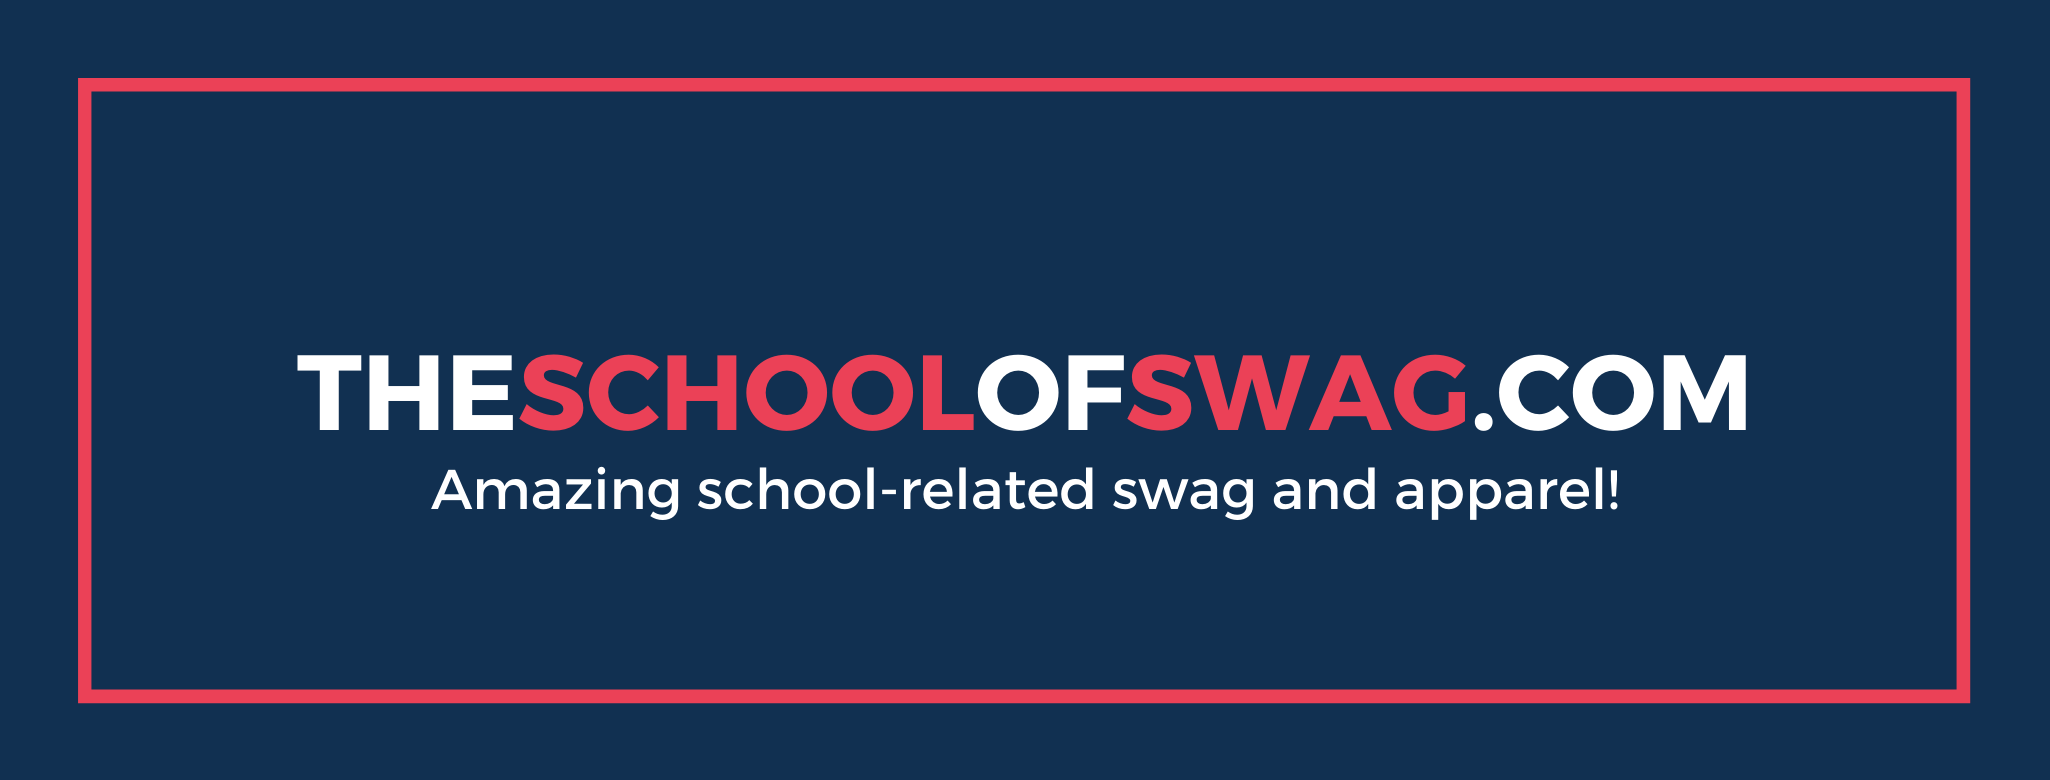 TheSchoolofSwag.com - Amazing school-related swag and apparel!